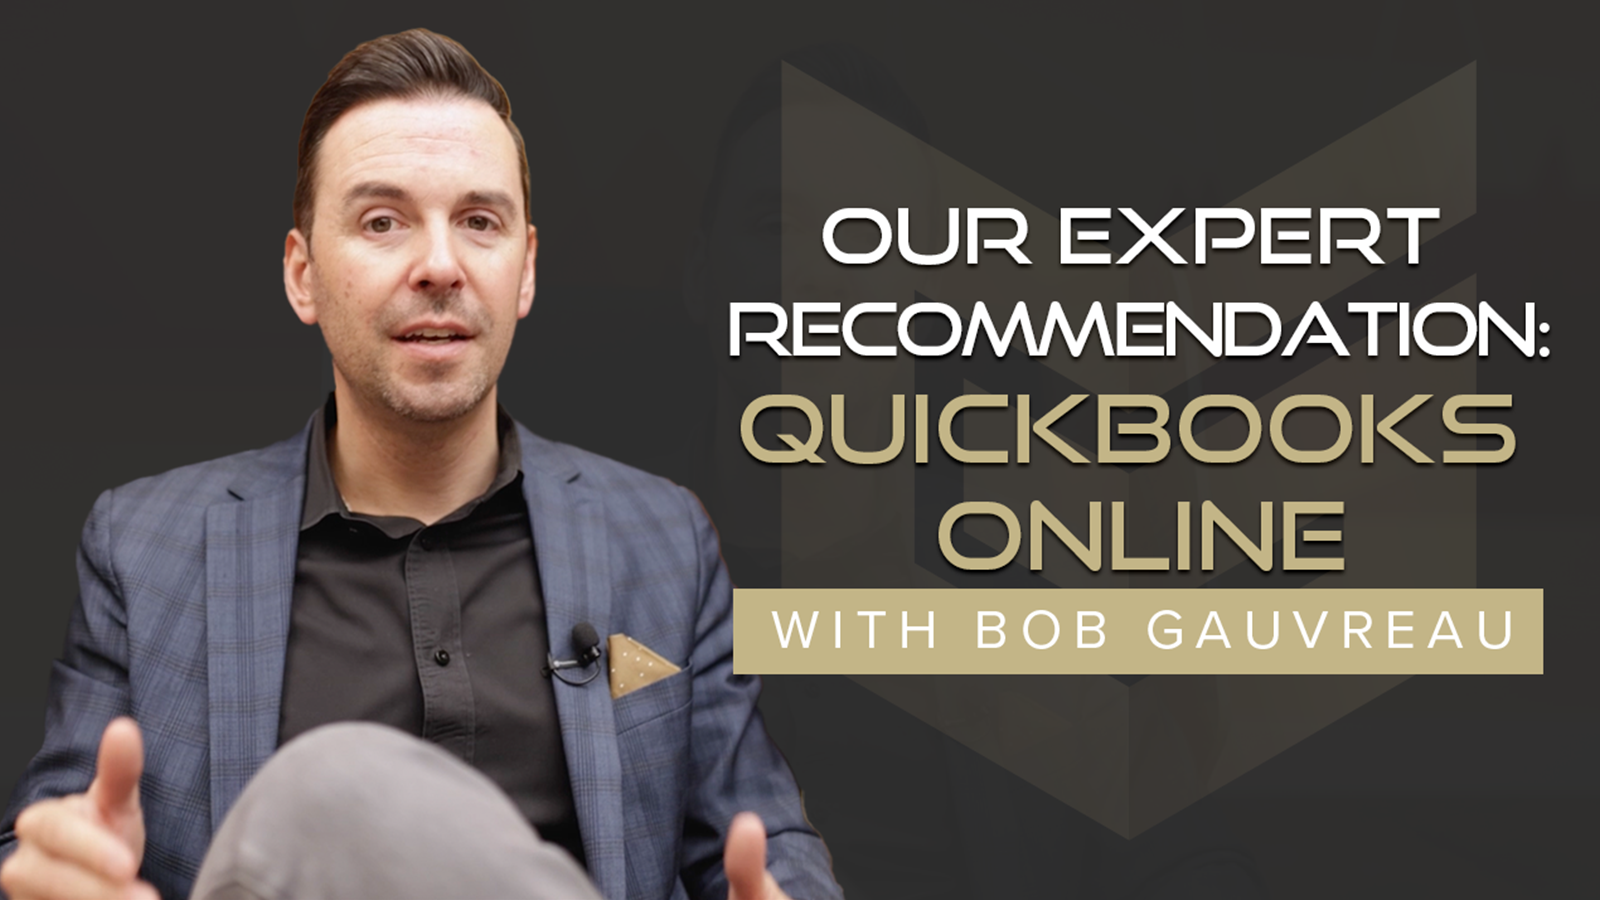 Why QuickBooks Online is the Best Choice for Your Bookkeeping Needs: Our Expert Recommendation